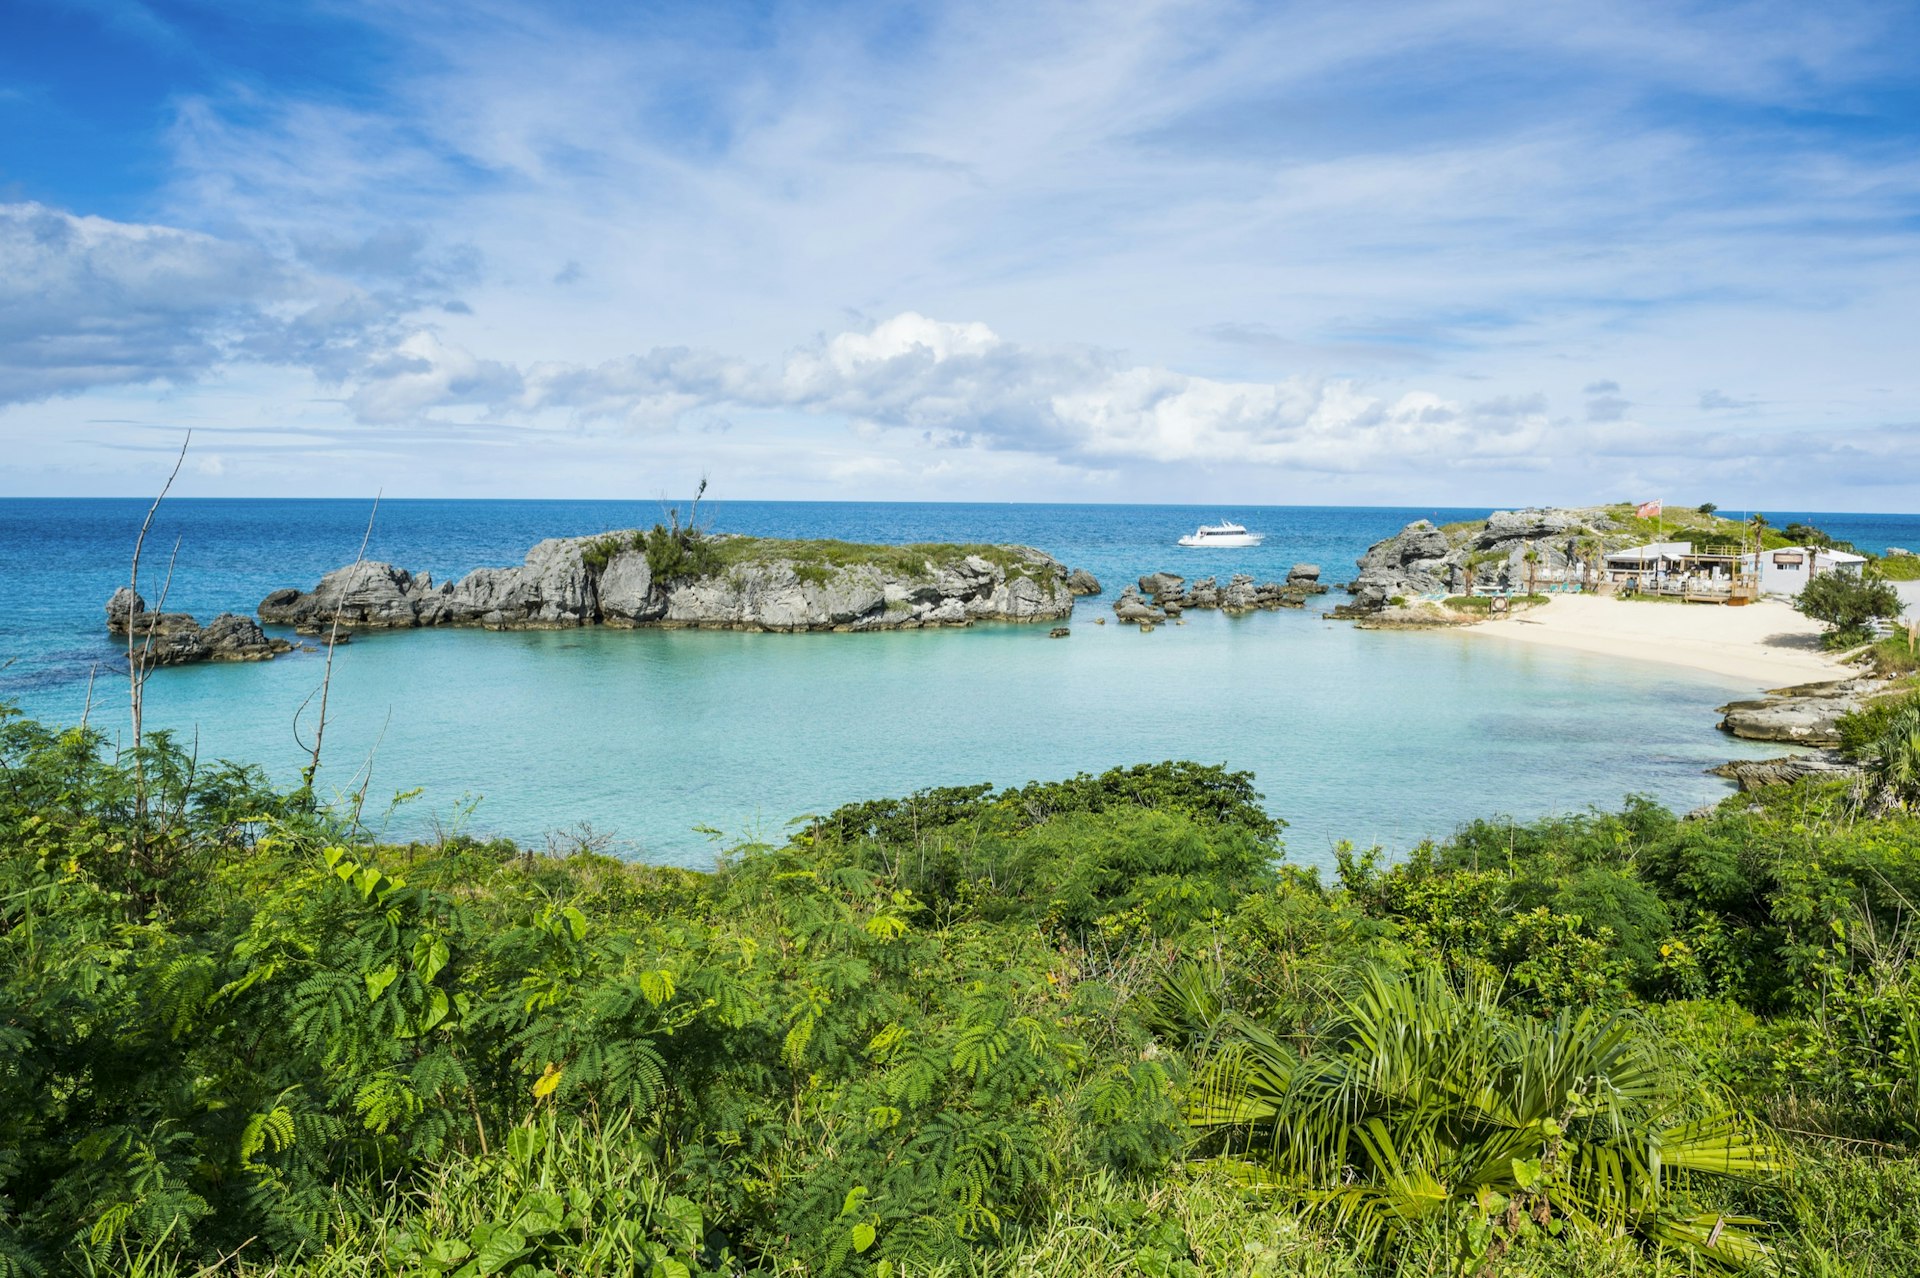 Bermuda's Tobacco Bay as seen from the greenery that surrounds this perfect white bowl of sand, with a white boat sailing past